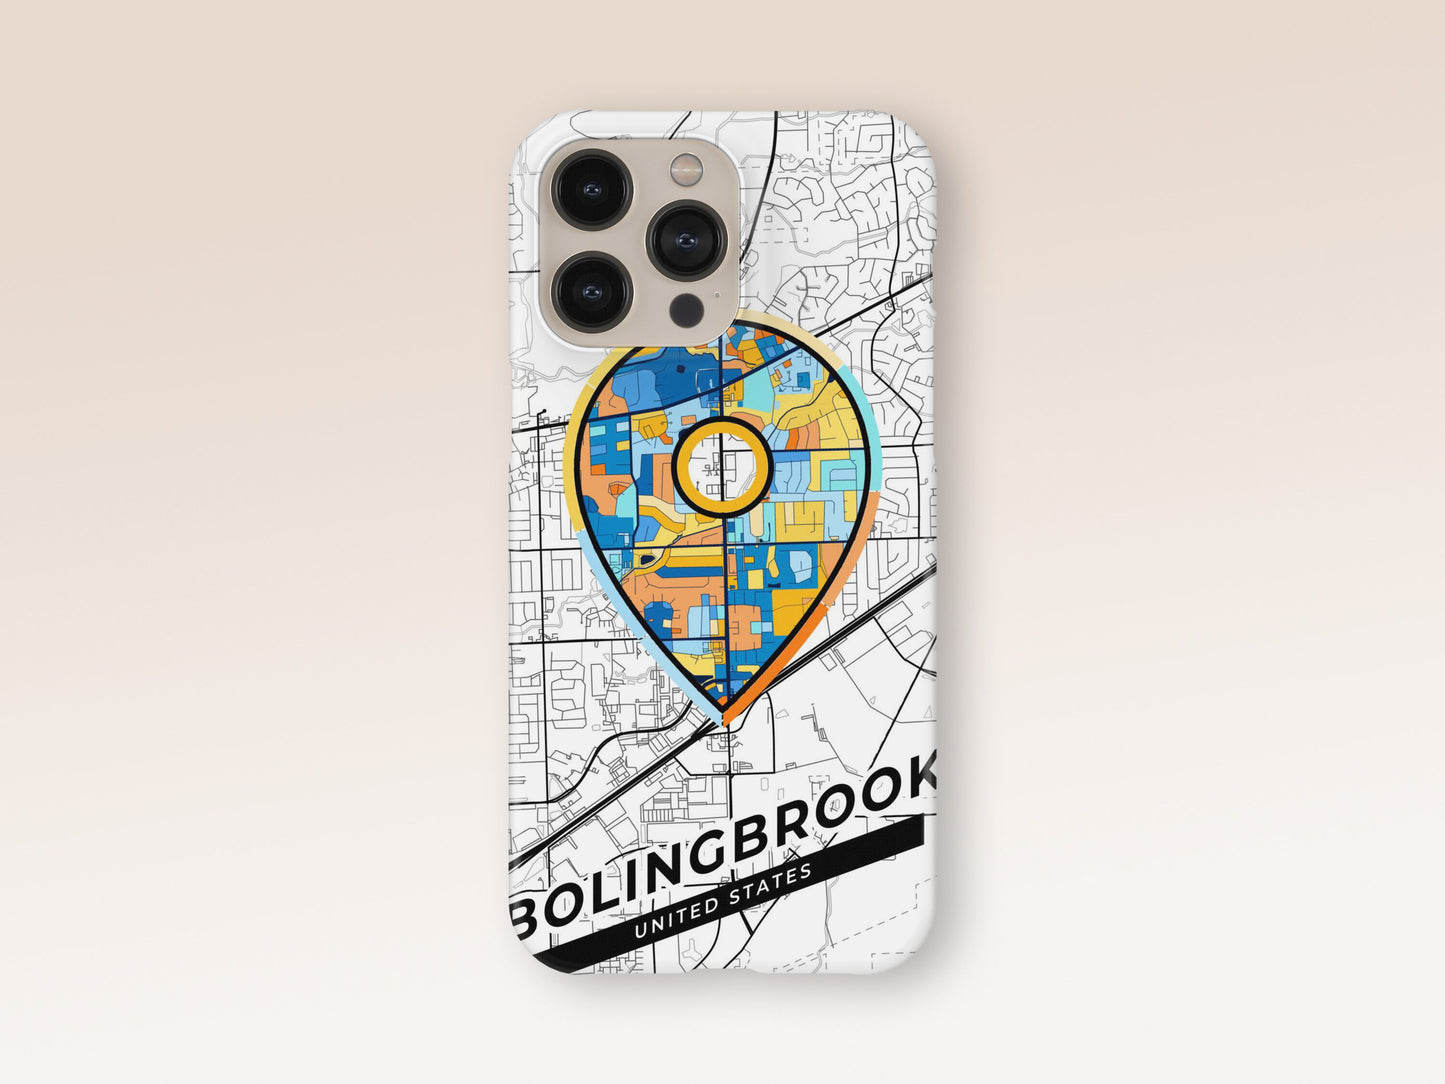 Bolingbrook Illinois slim phone case with colorful icon. Birthday, wedding or housewarming gift. Couple match cases. 1